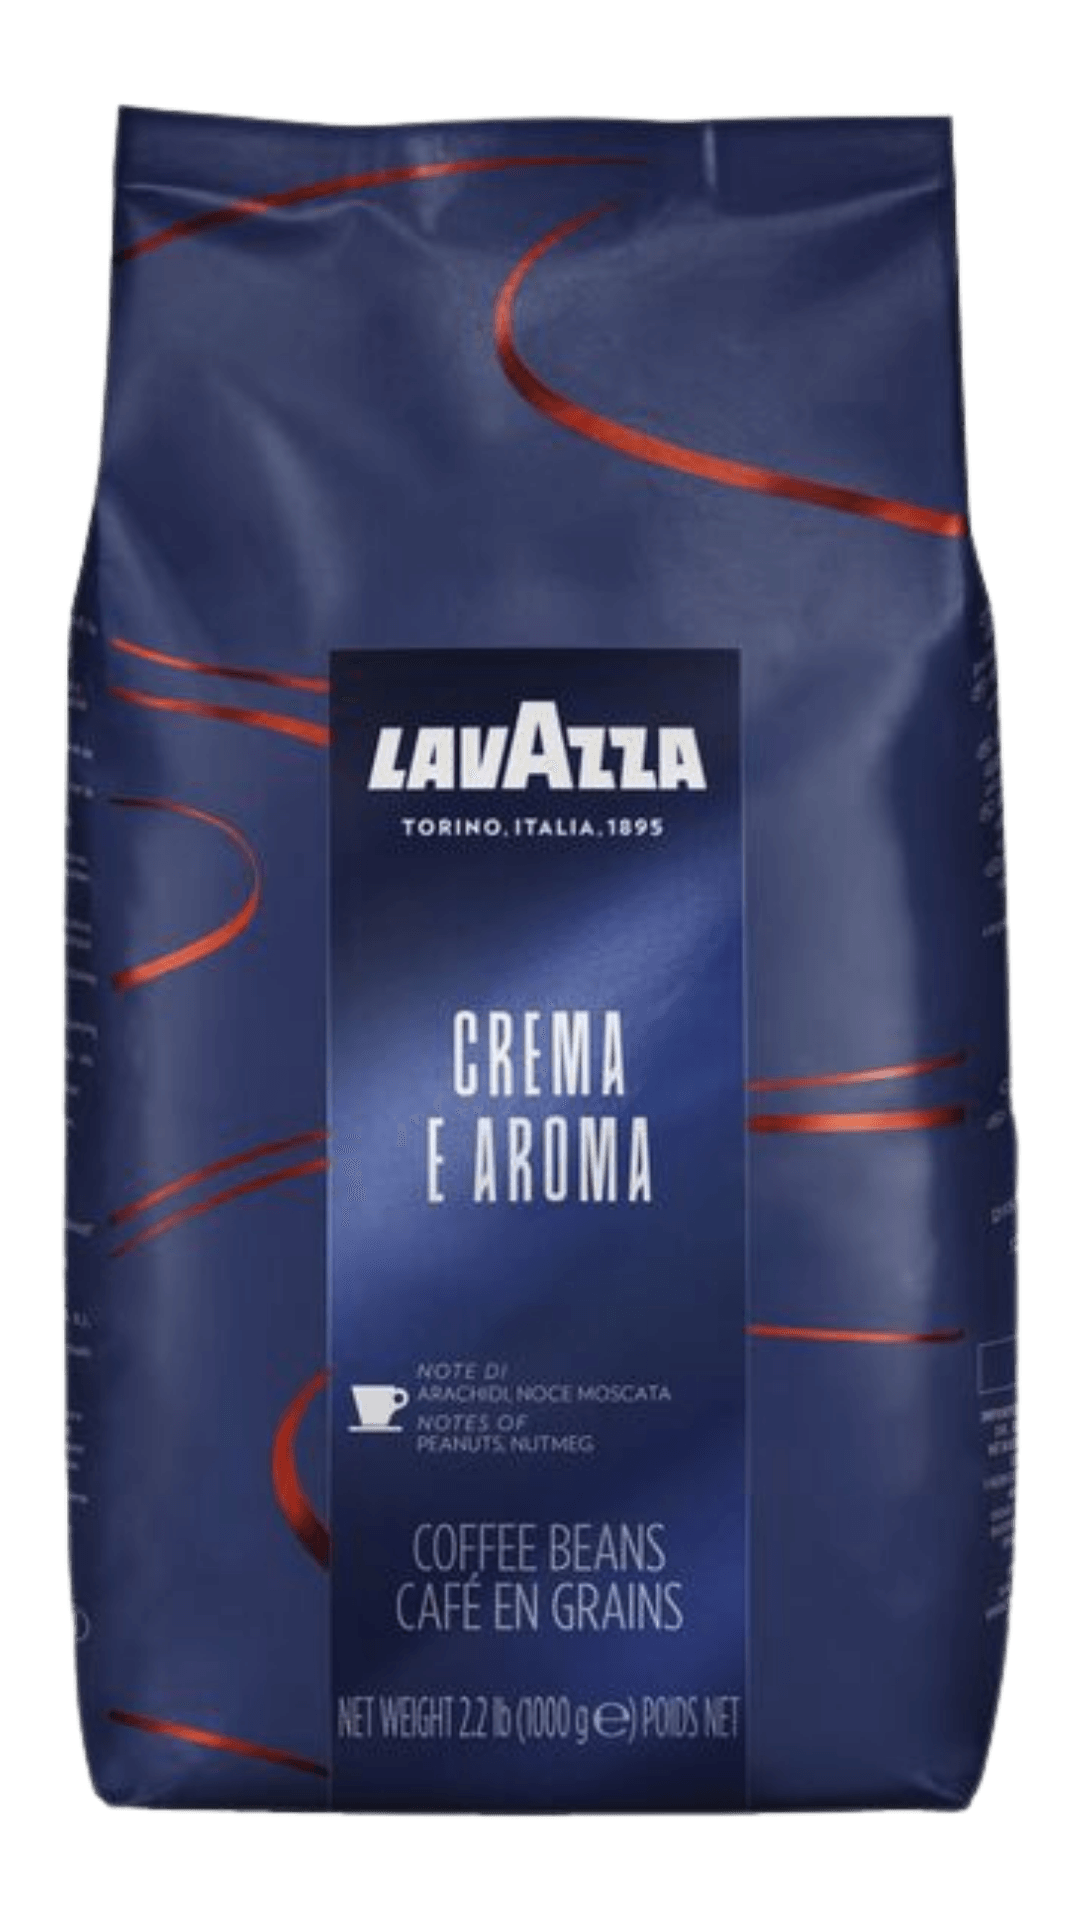 lavazza packaging